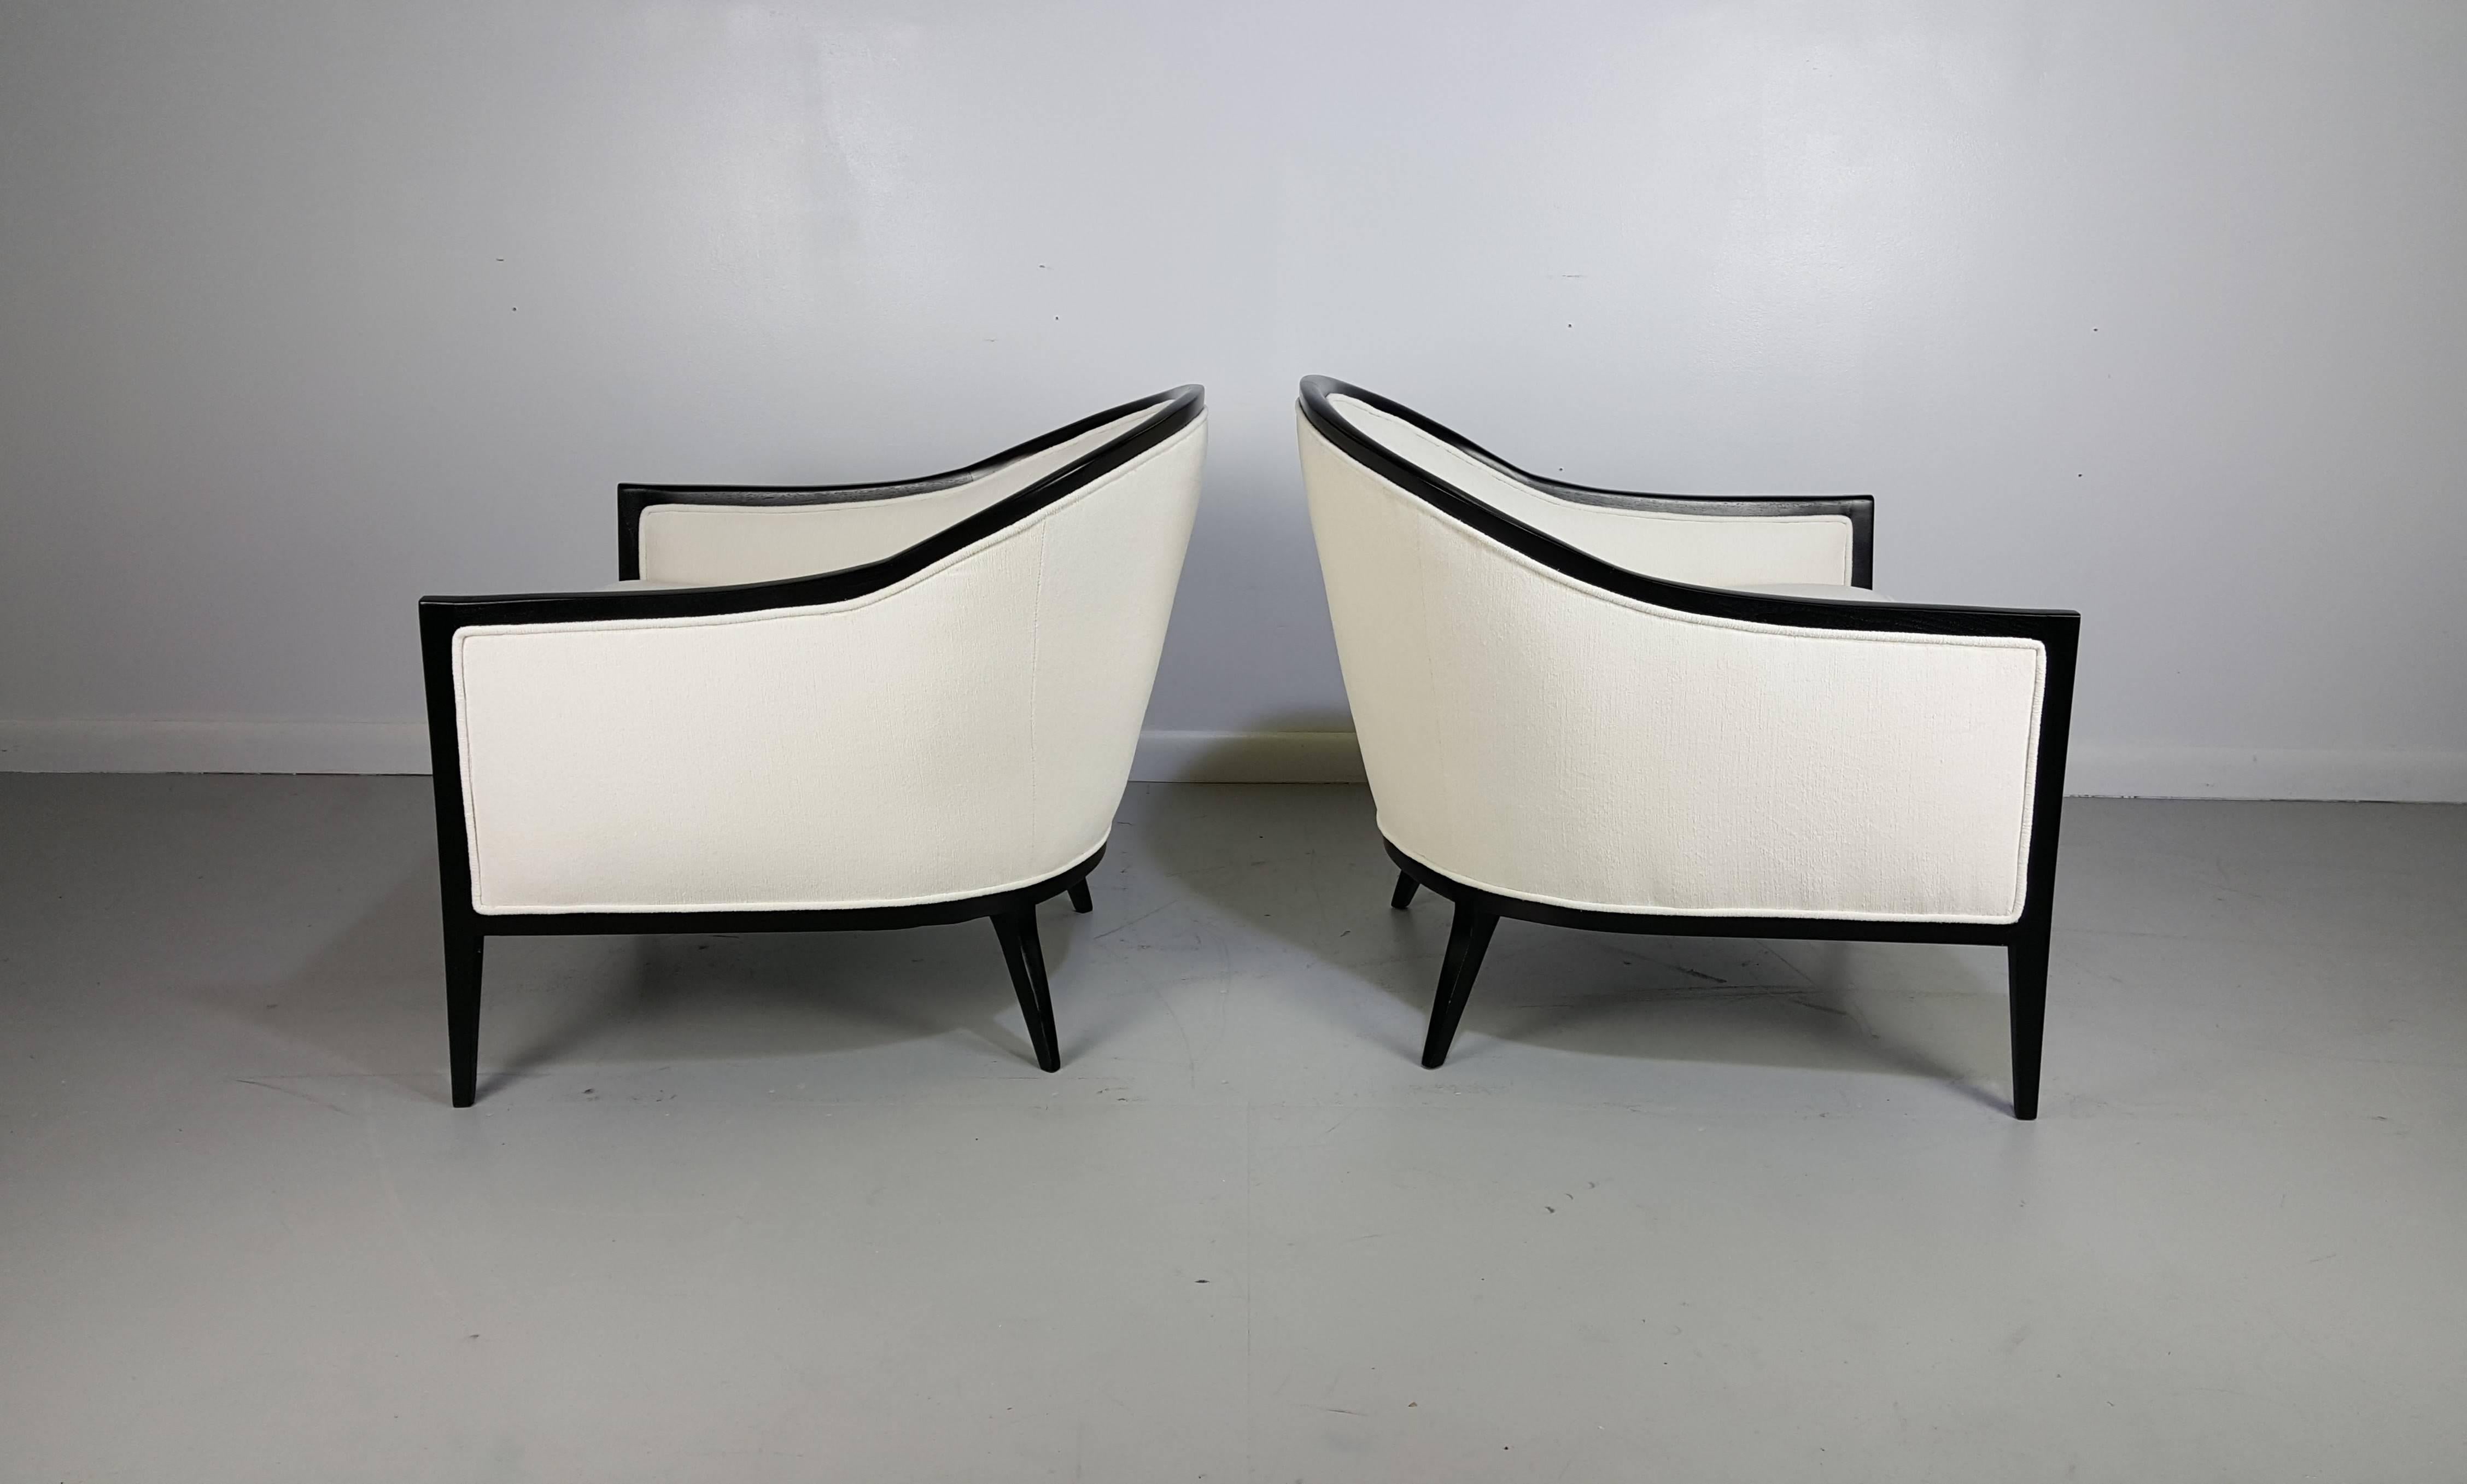 Elegant ebonized Harvey Probber lounge chairs, 1960s.

See this item in our private NYC showroom! Refine Limited is located in the heart of Chelsea at the history Starrett-LeHigh Building, 601 West 26th Street, Suite M258. Please call us to